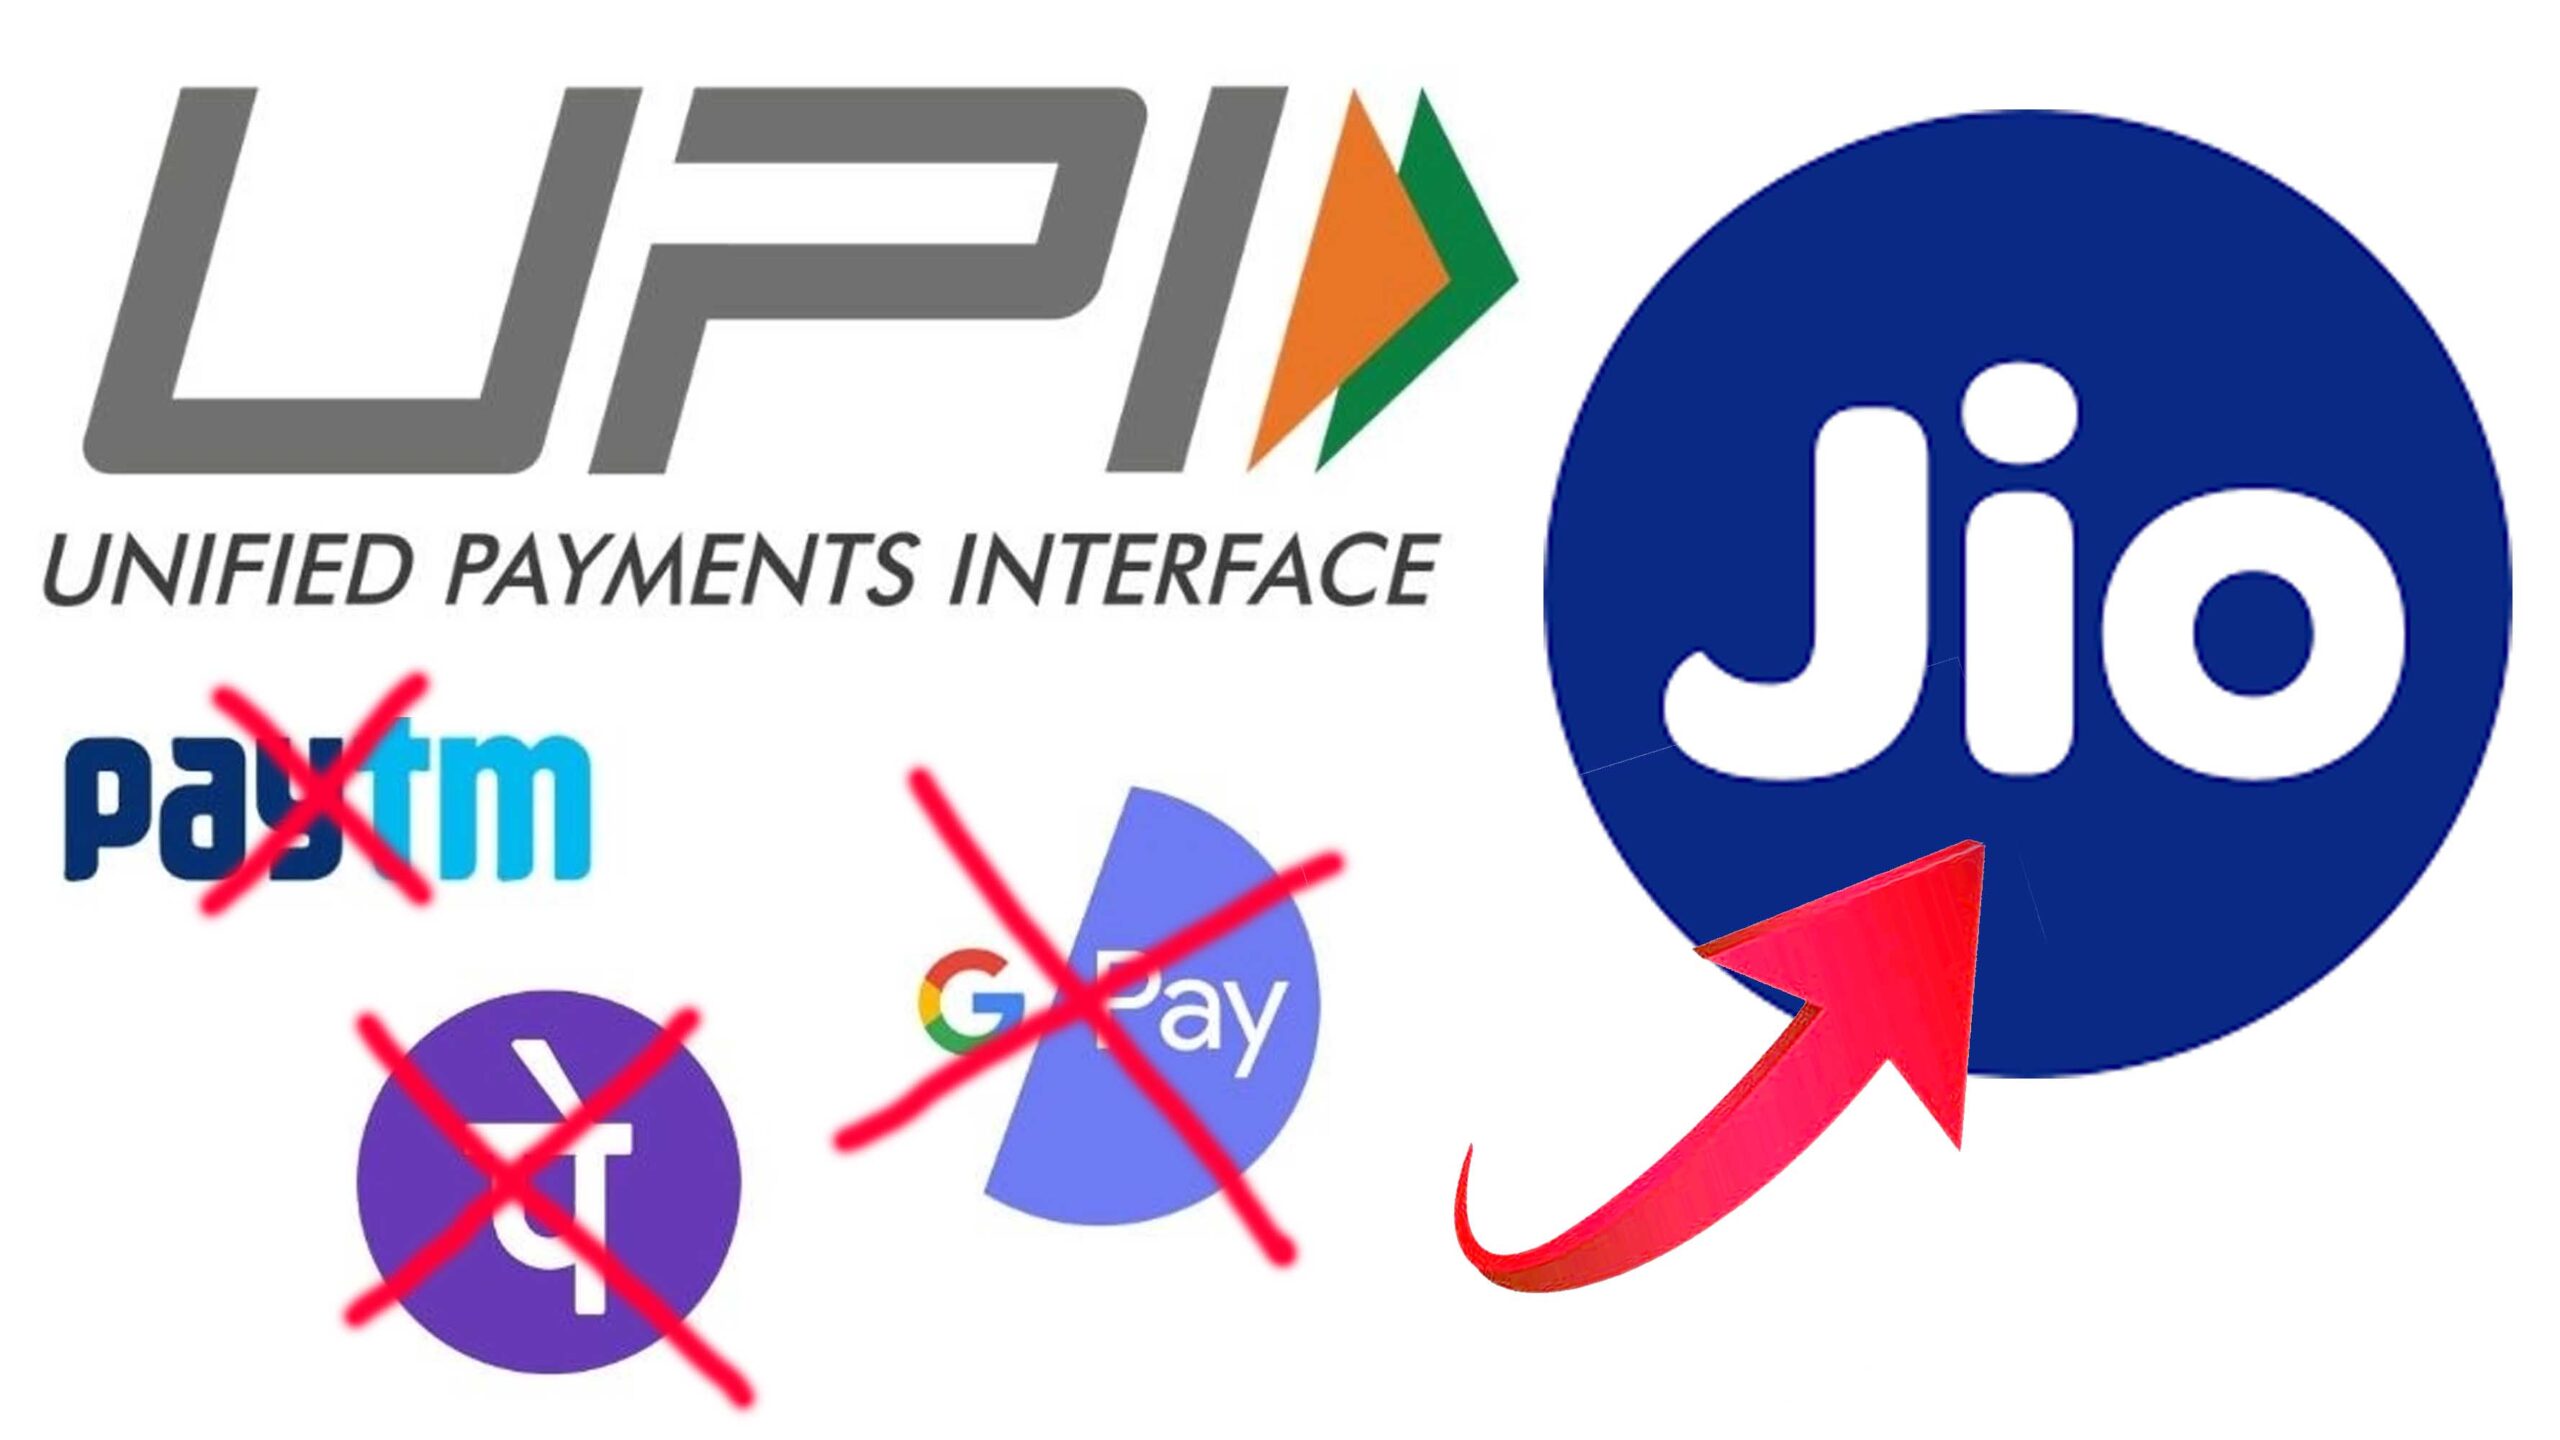 The problem is that apps like Google pay, Phone pay, Paytm are being used more